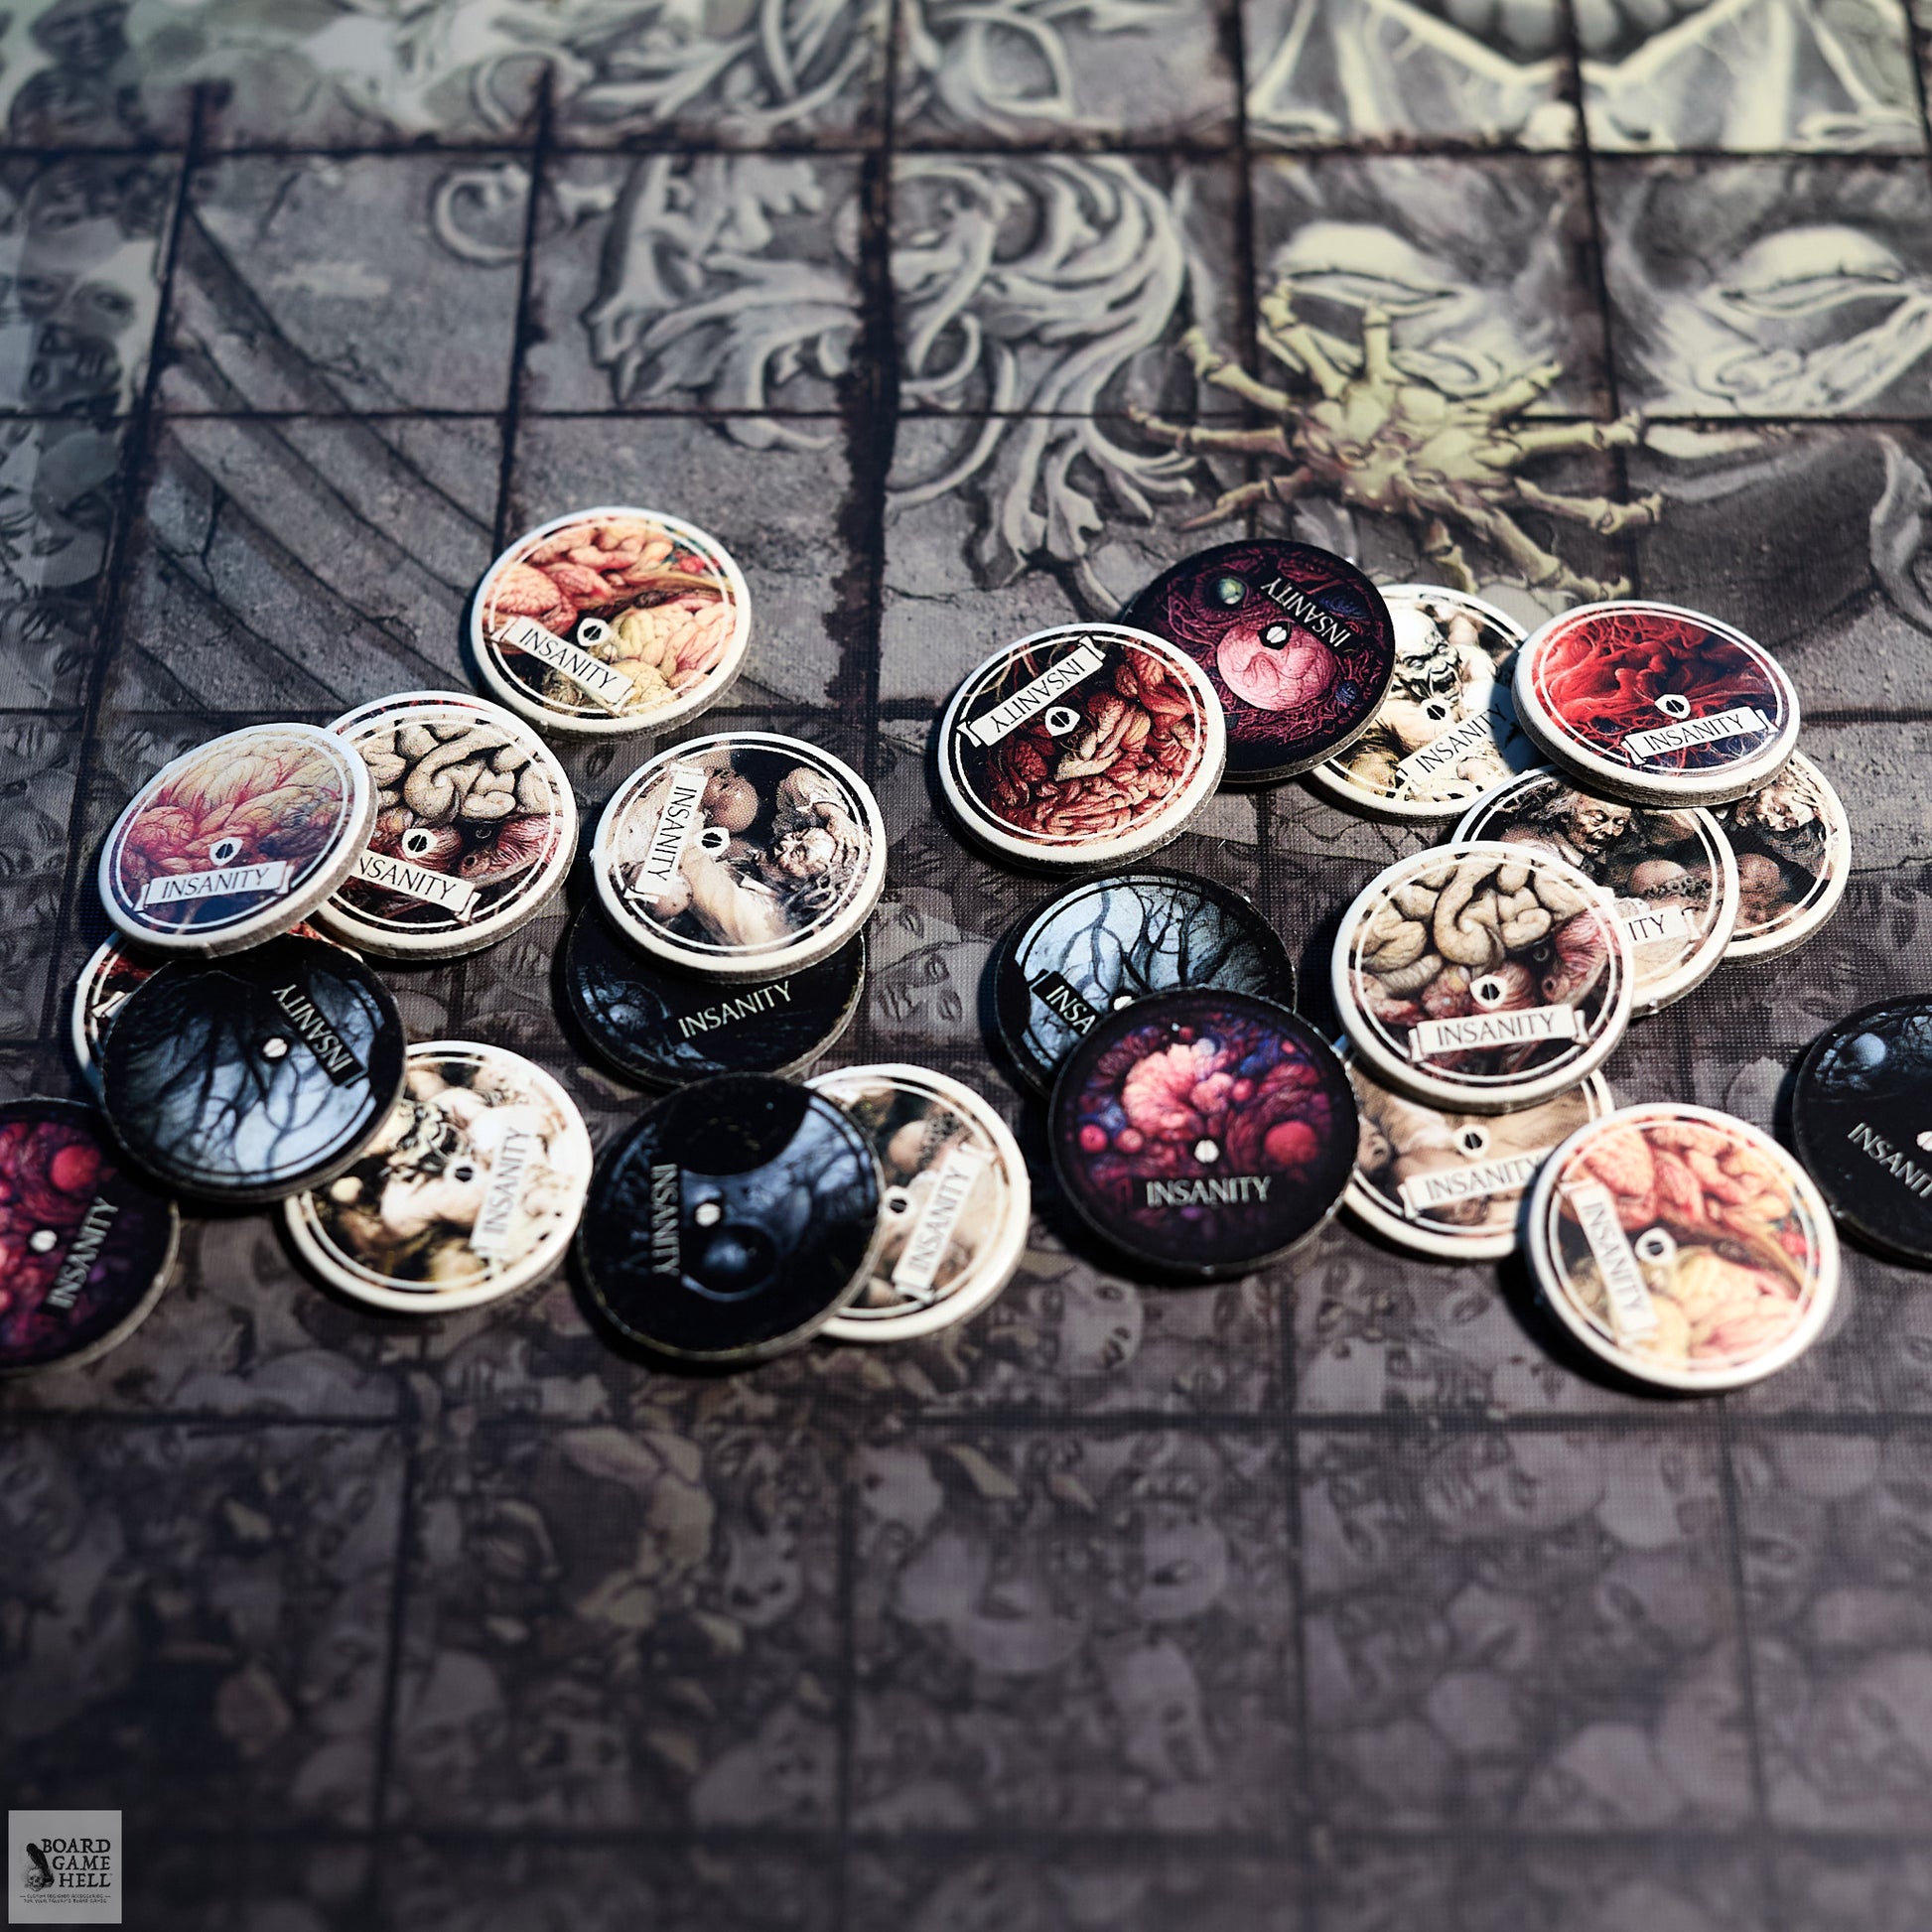 Board Game Hell’s Insanity Tokens™, brain and lunatic sets combined.